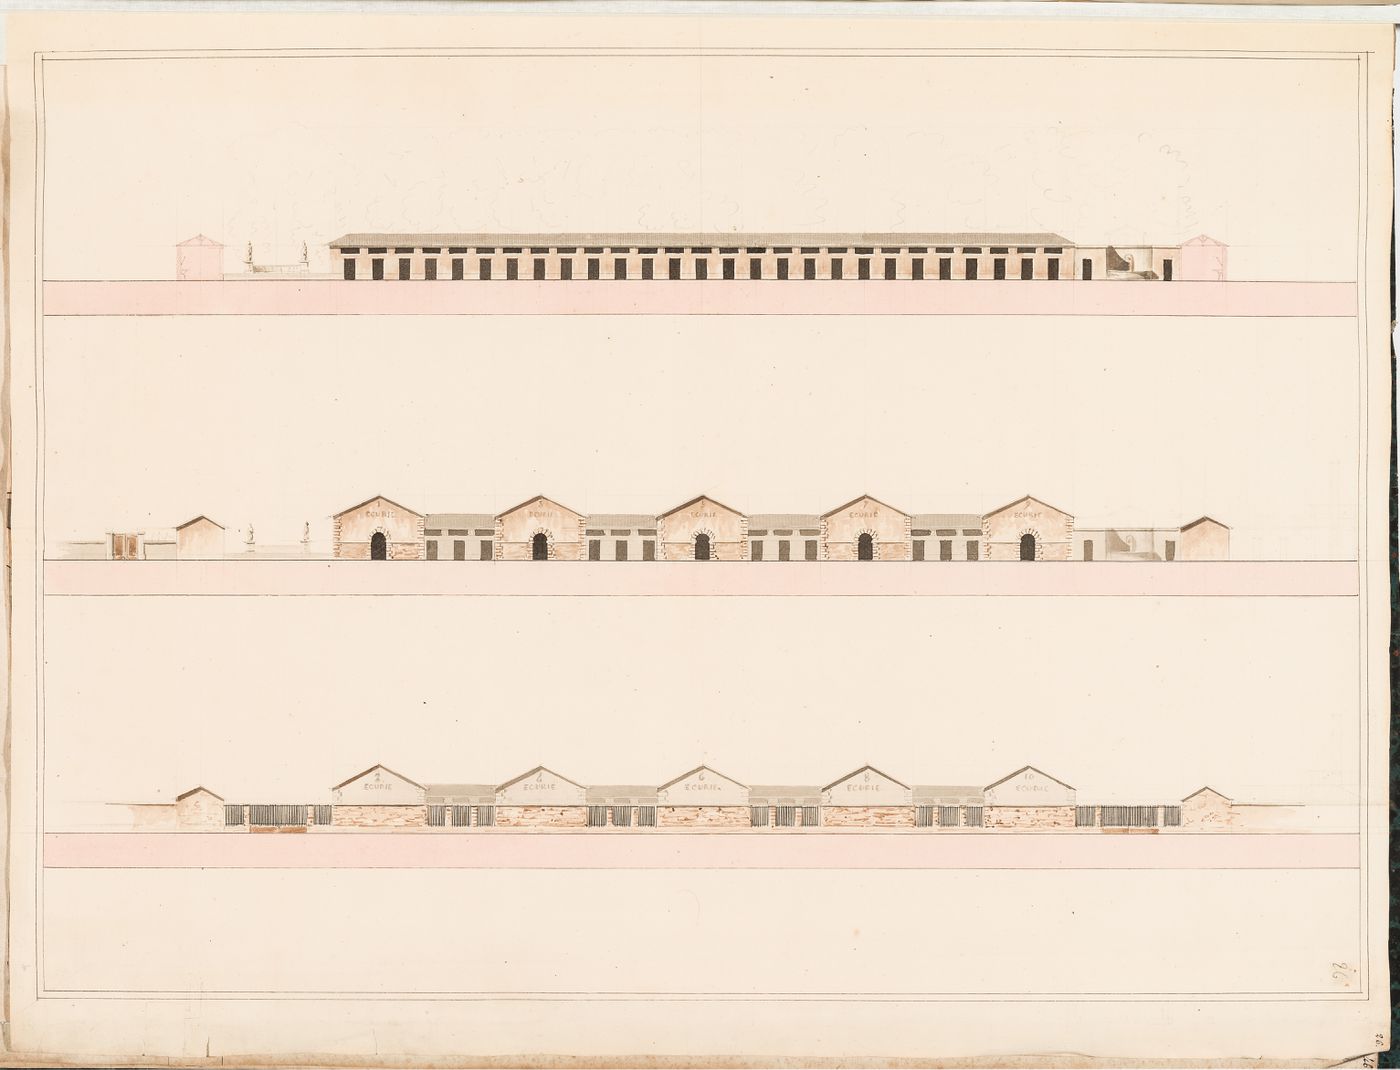 Project for a horse auction house and infirmary, Clos St. Charles, nouveau quartier Poissonnière: Elevations for stables